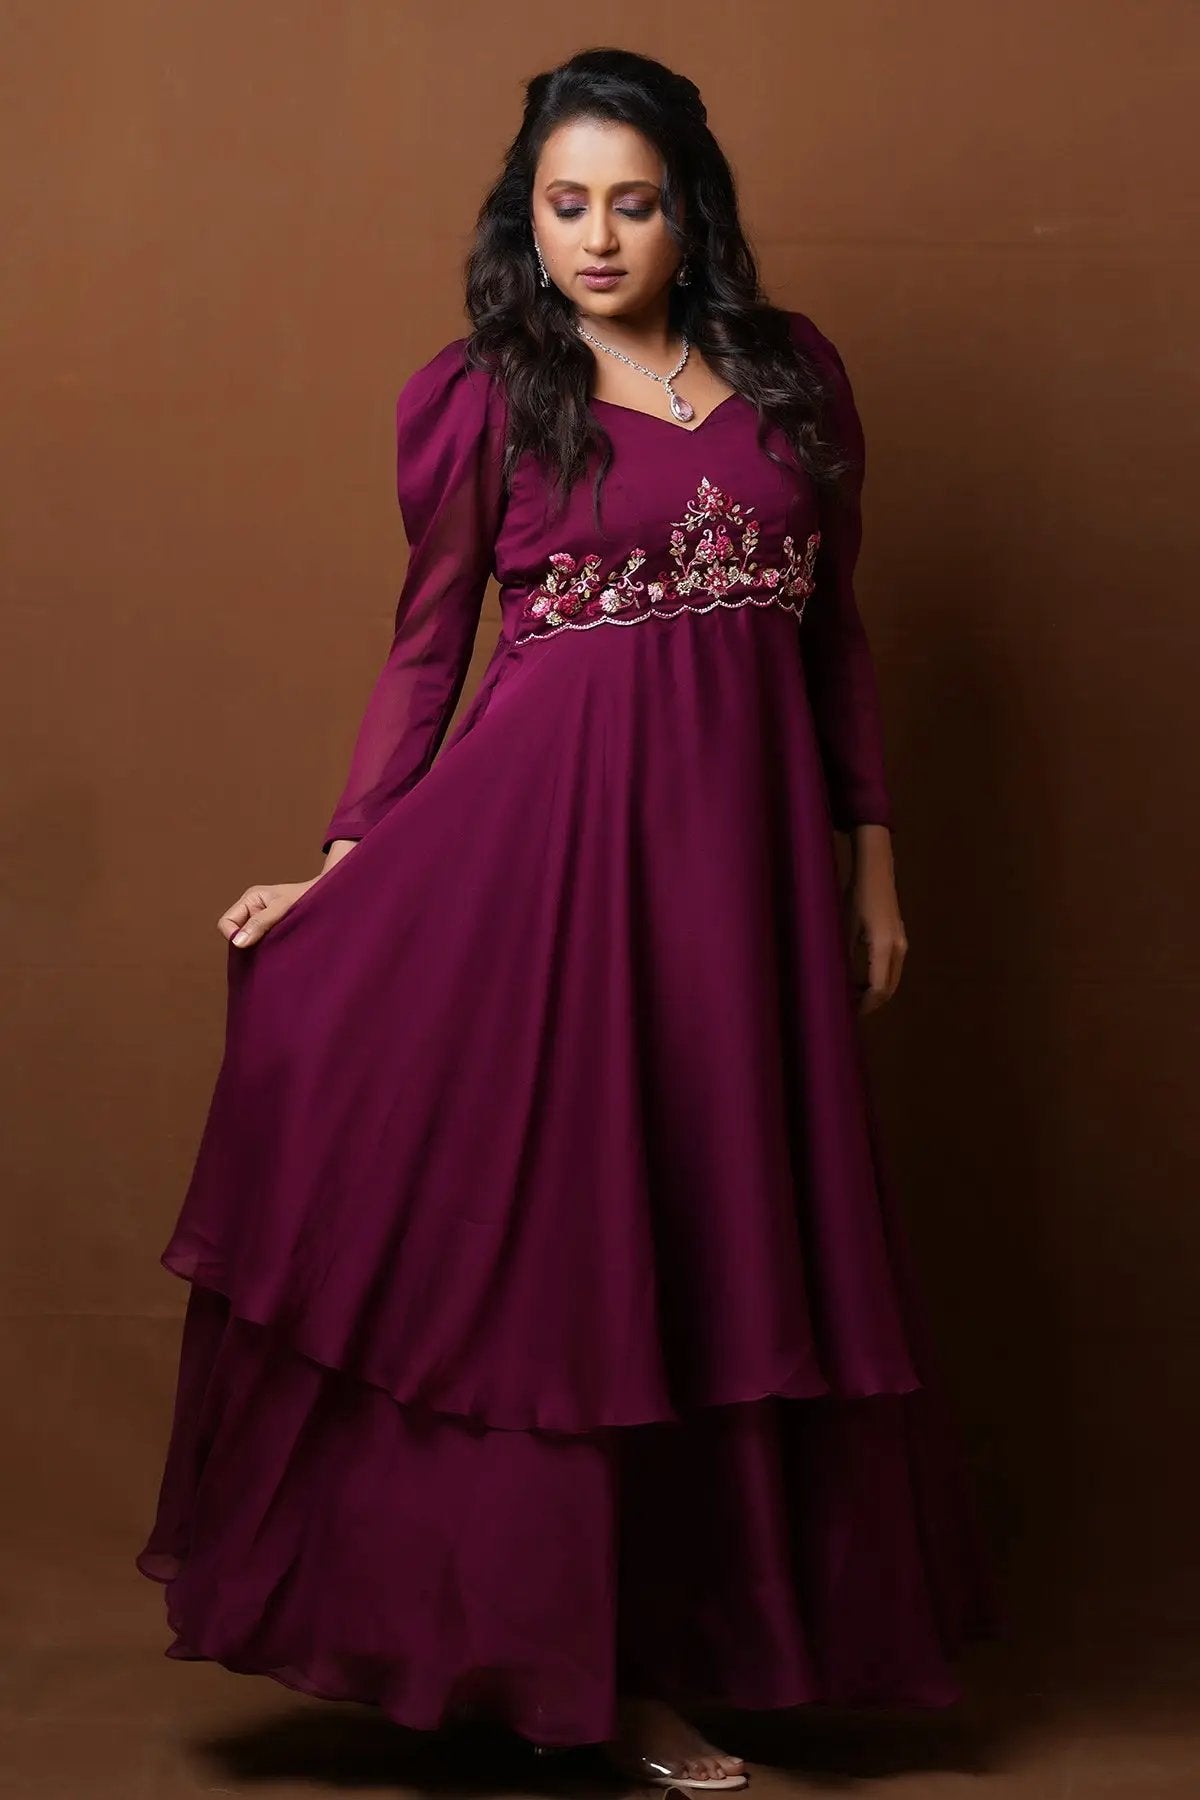 Chaheli Party Wear Gown from Bullionknot